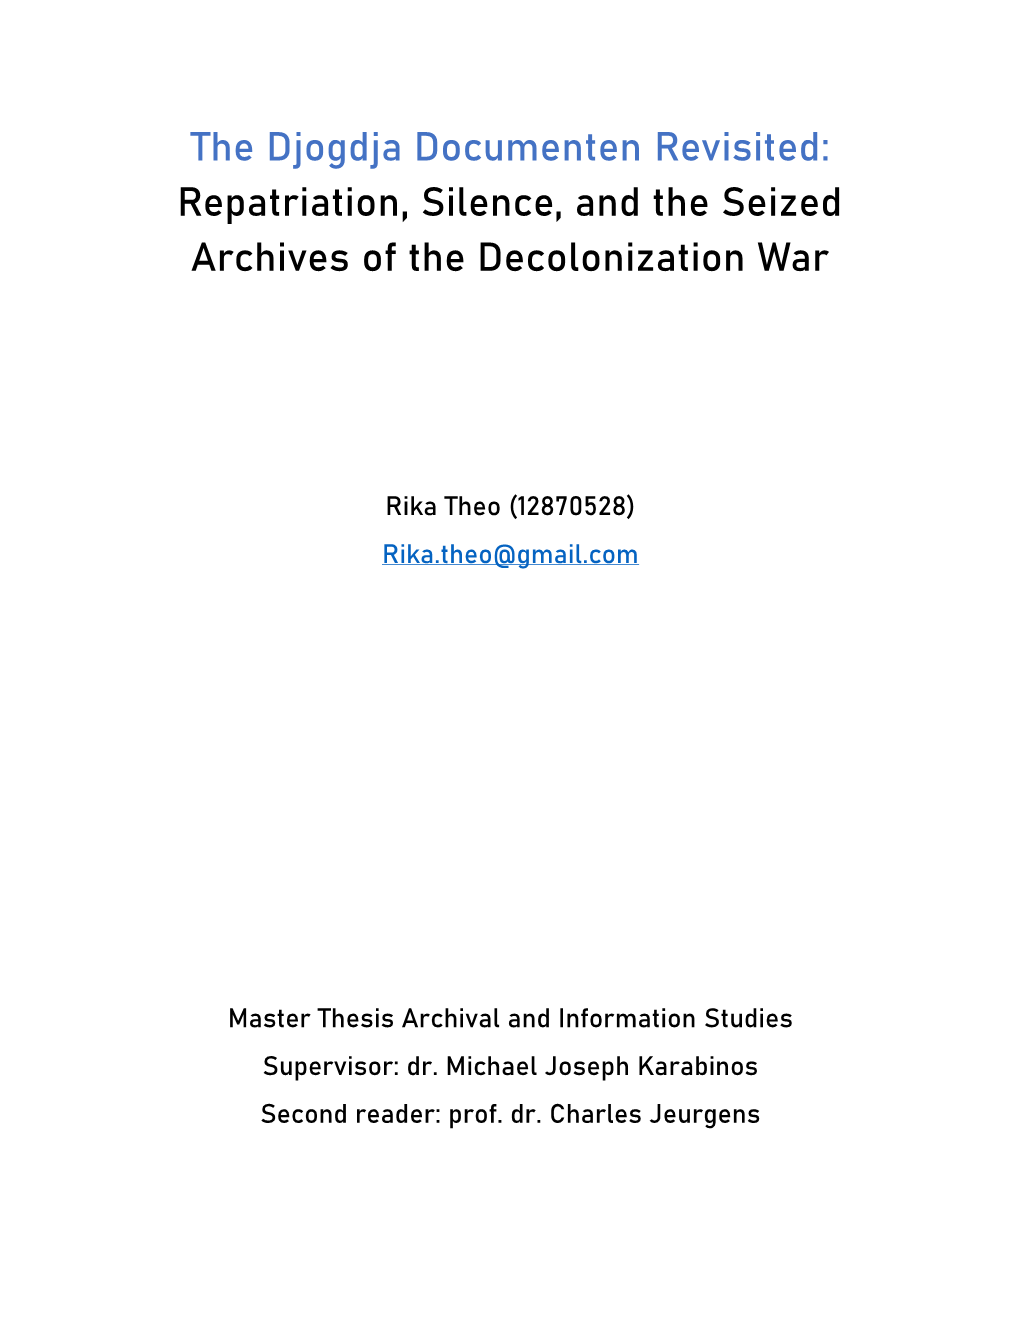 The Djogdja Documenten Revisited: Repatriation, Silence, and the Seized Archives of the Decolonization War